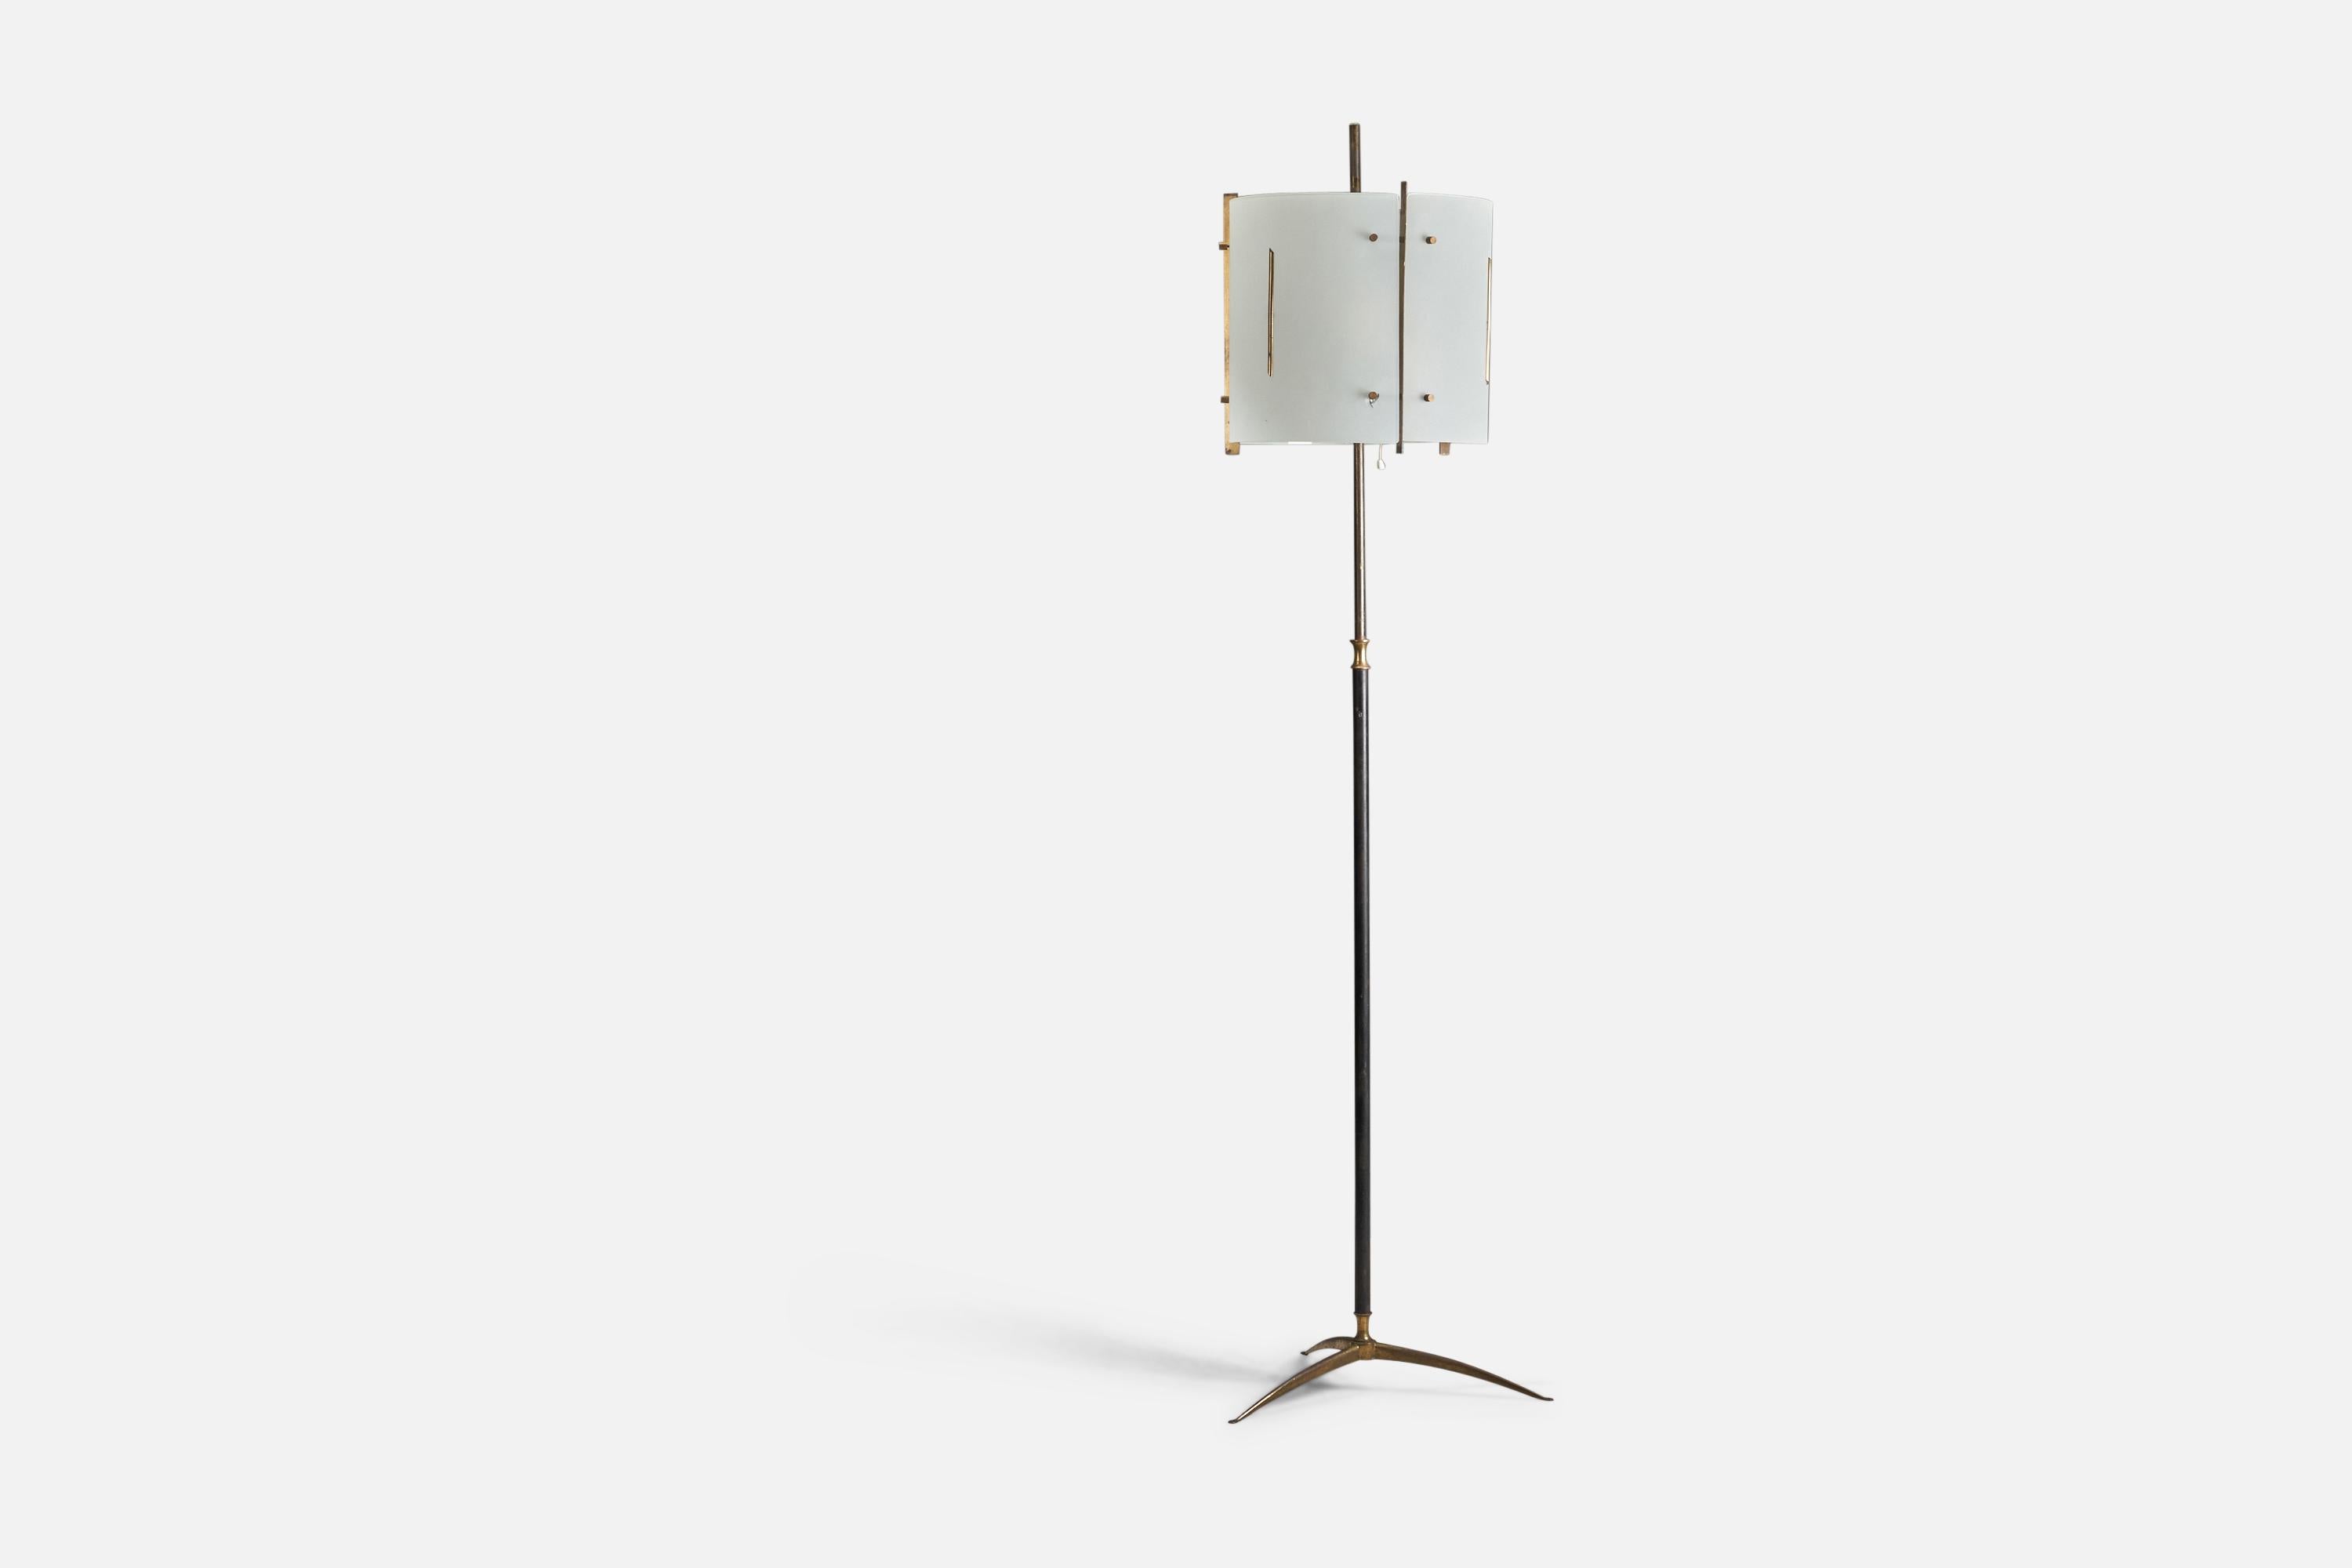 A brass, metal, glass floor lamp designed and produced by an Italian Designer, Italy, 1950s.

Sockets take standard E-26 medium base bulbs.

There is no maximum wattage stated on the fixture.